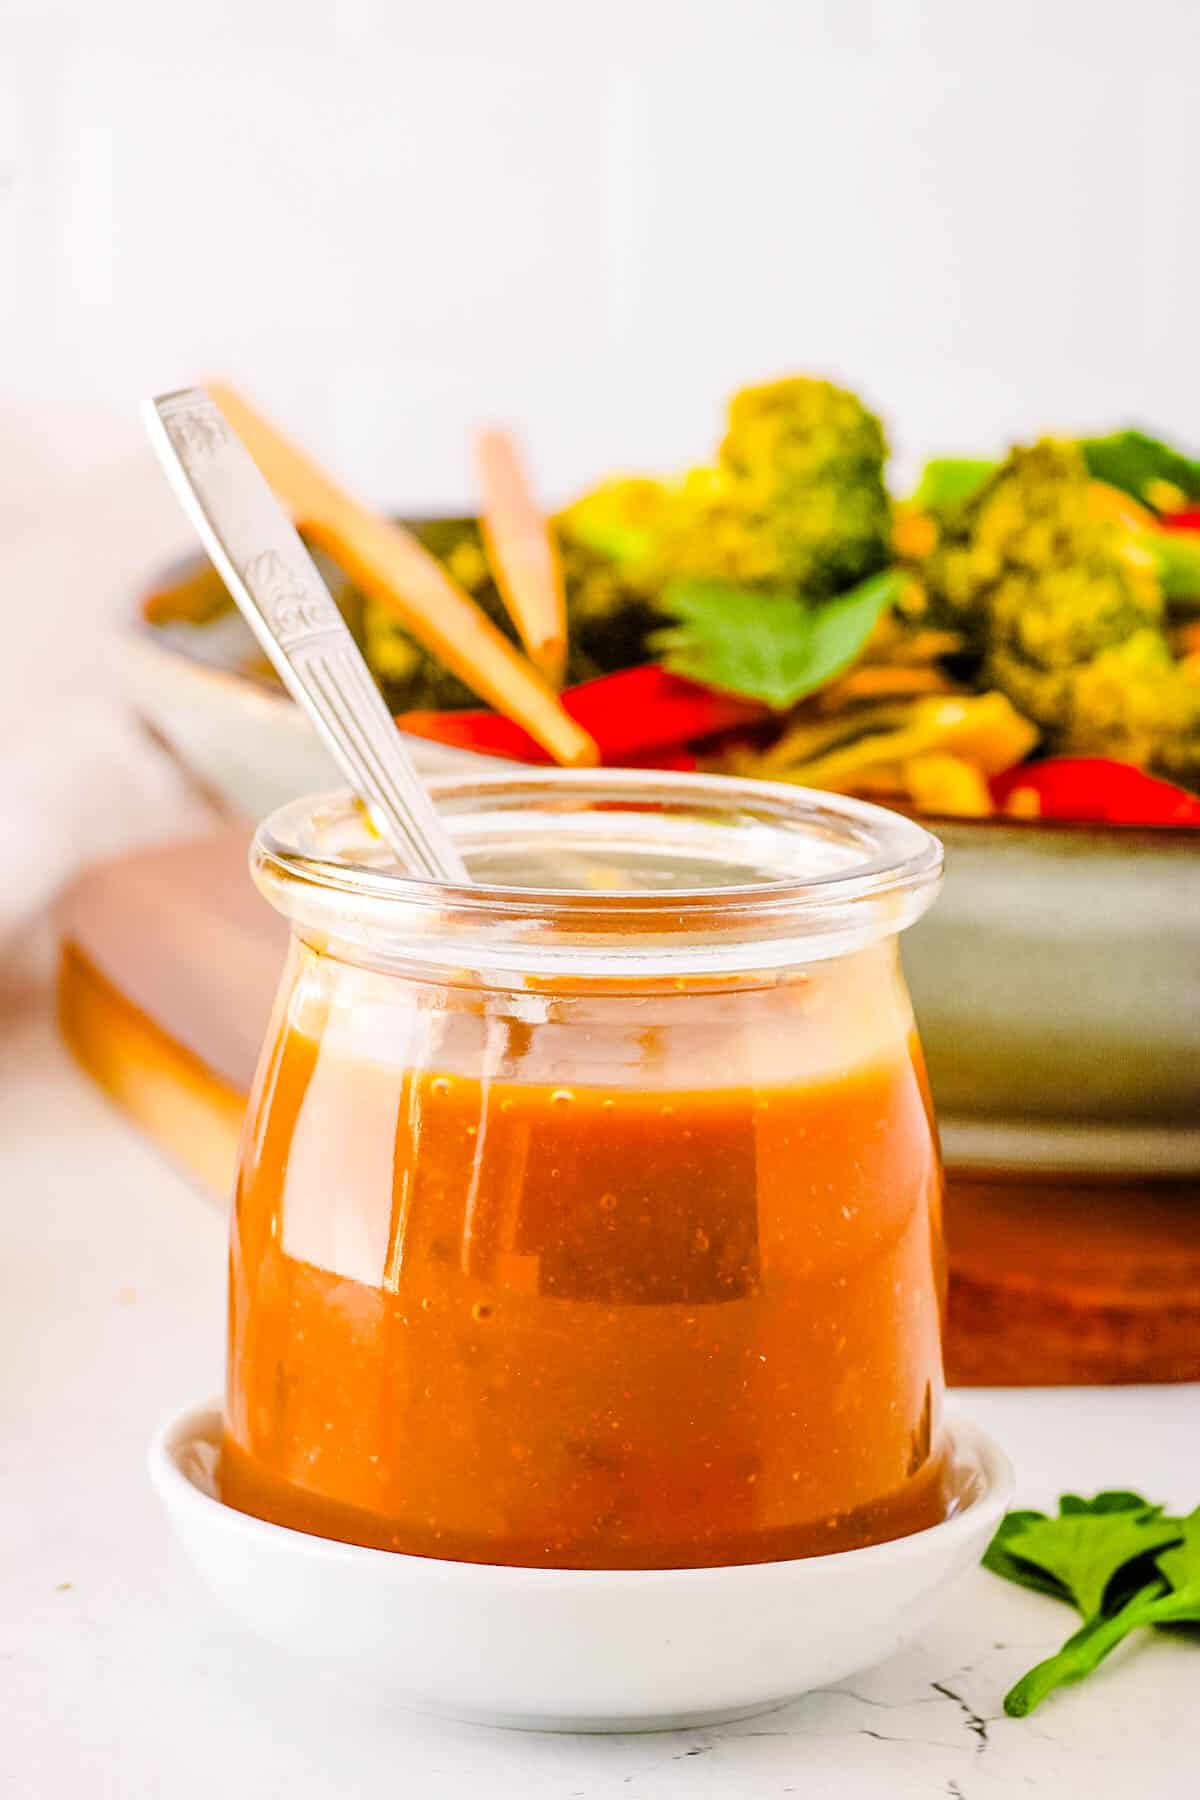 Healthy stir fry sauce, served in a gl، jar with a s،.